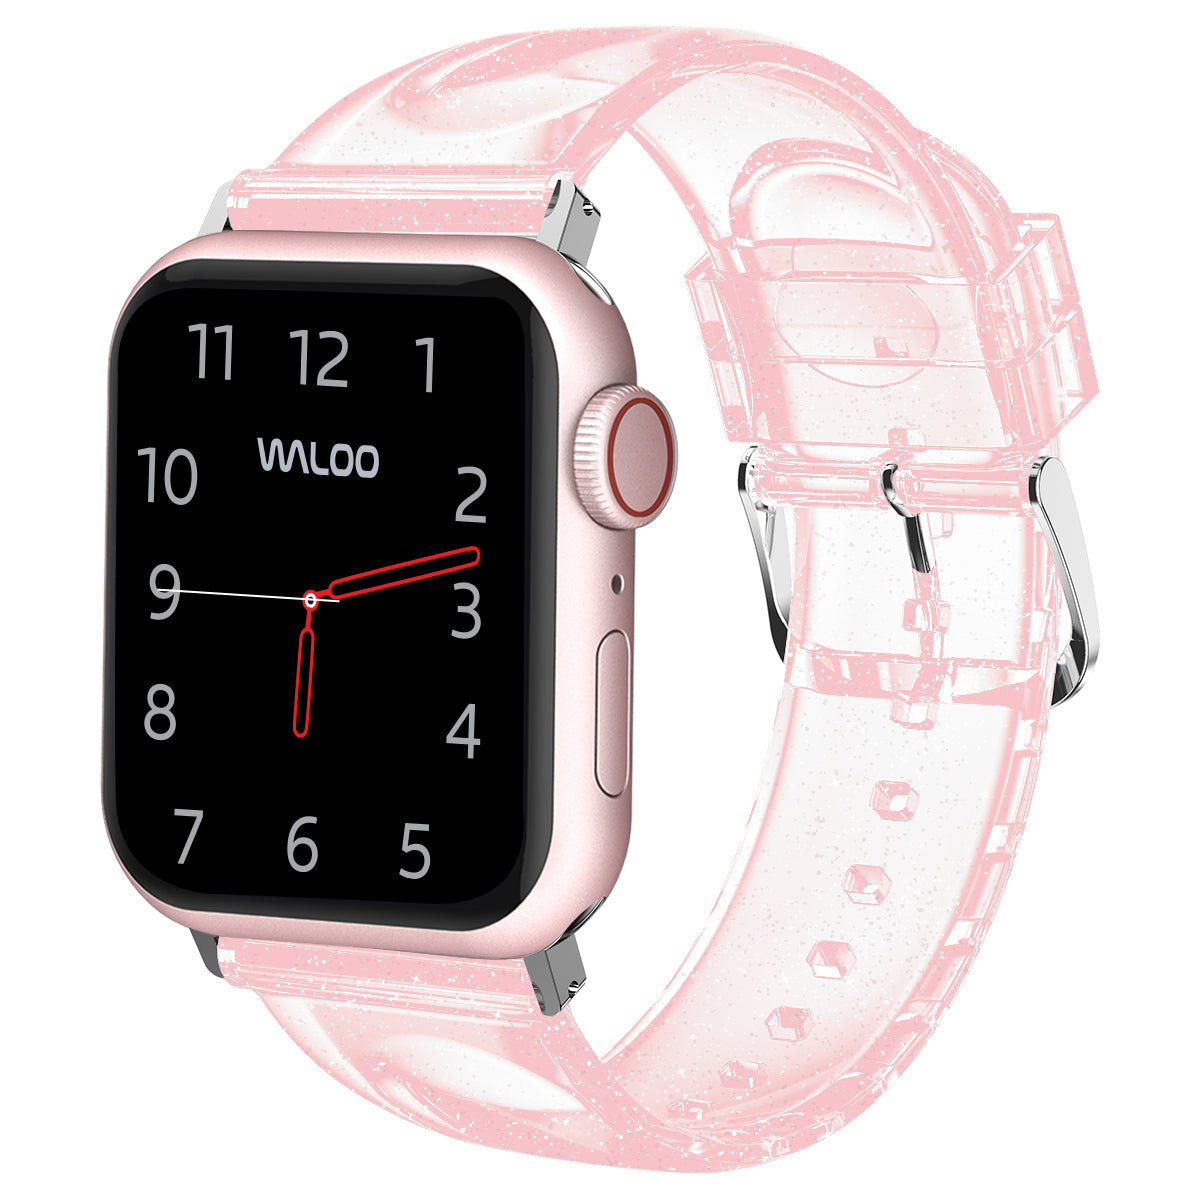 Waloo Clear Glitter Band For Apple Watch